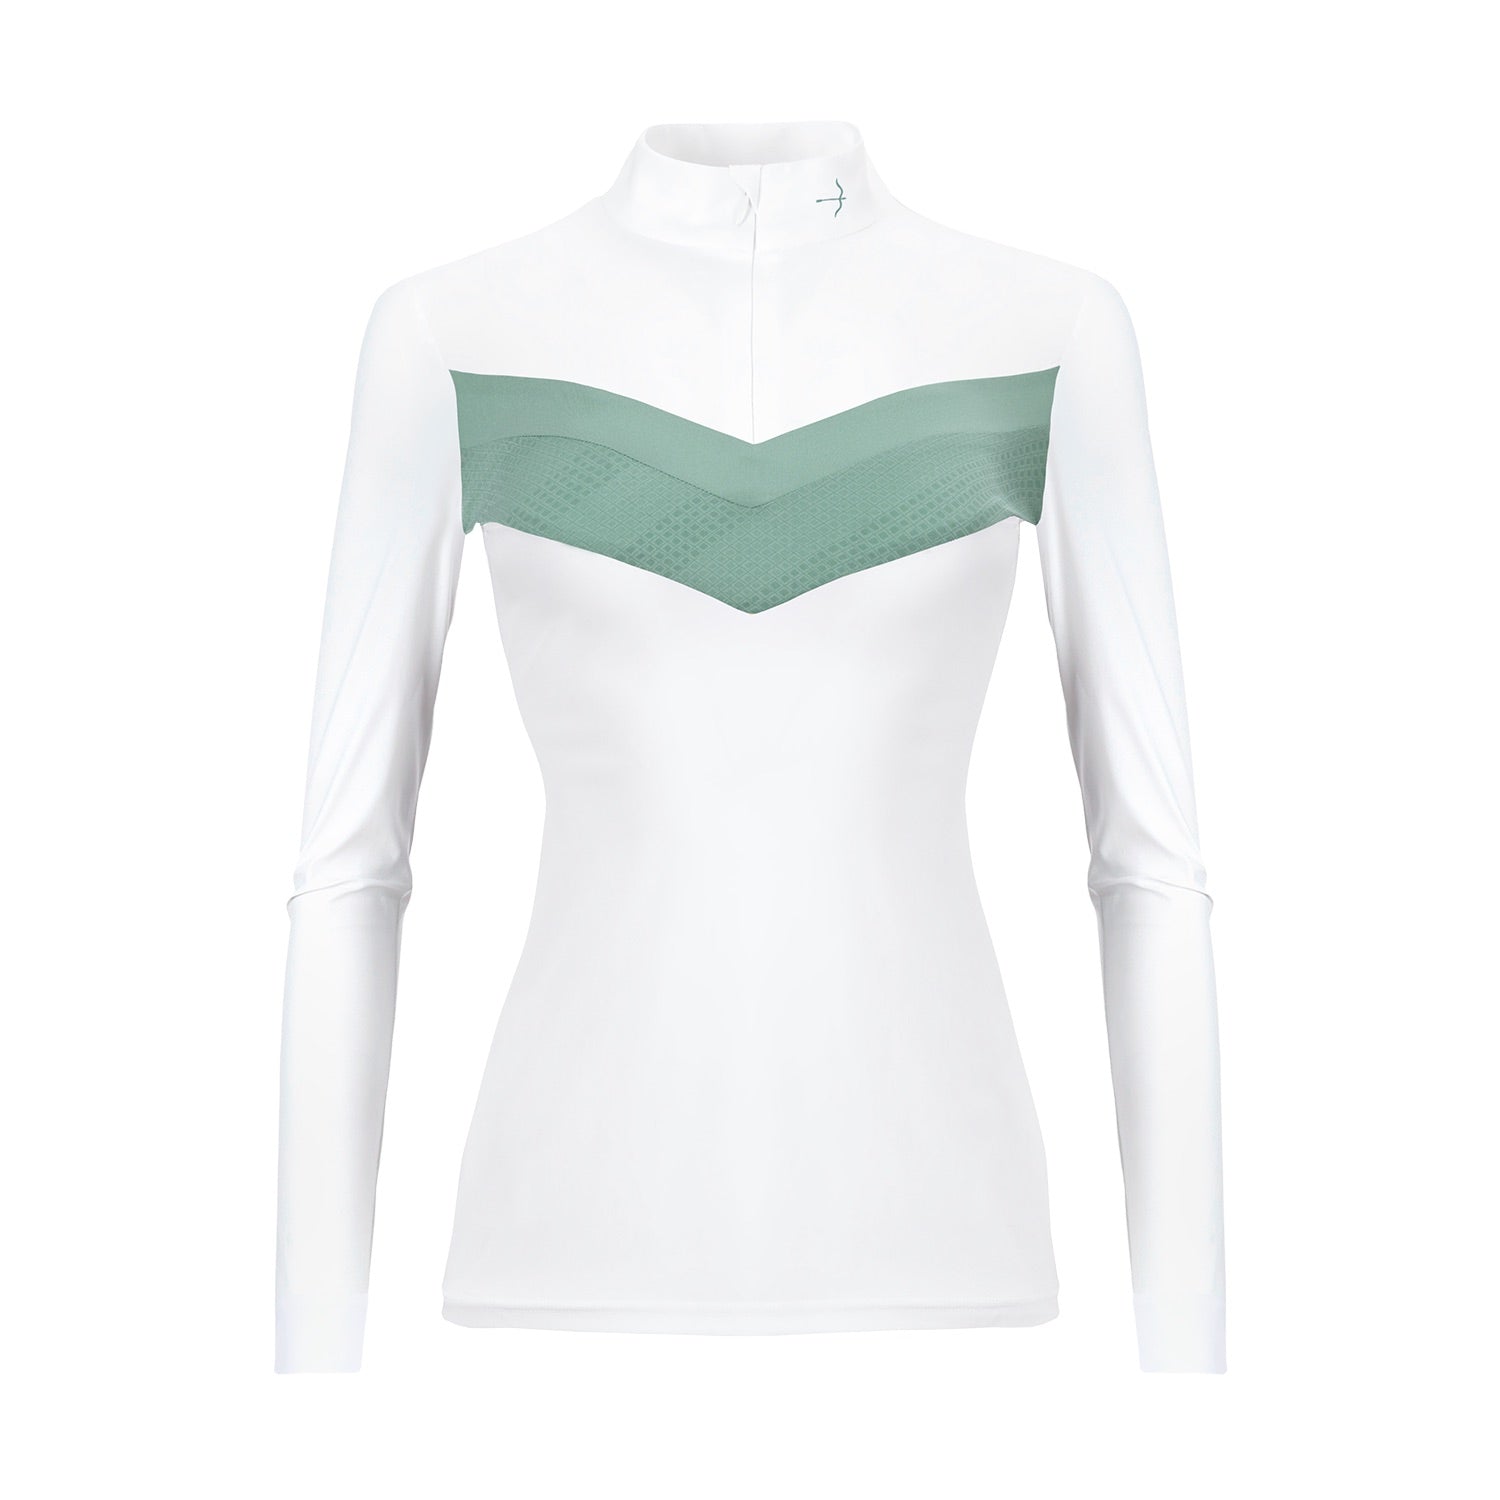 Keep cool this summer with the Laguso Vivian Geo Jade show shirt. The green self textured and plain v panel give a feminine sporty look. Made from bi elastic breathable sports fabric. Stand-up collar with zipper and underlaid zip cover. 